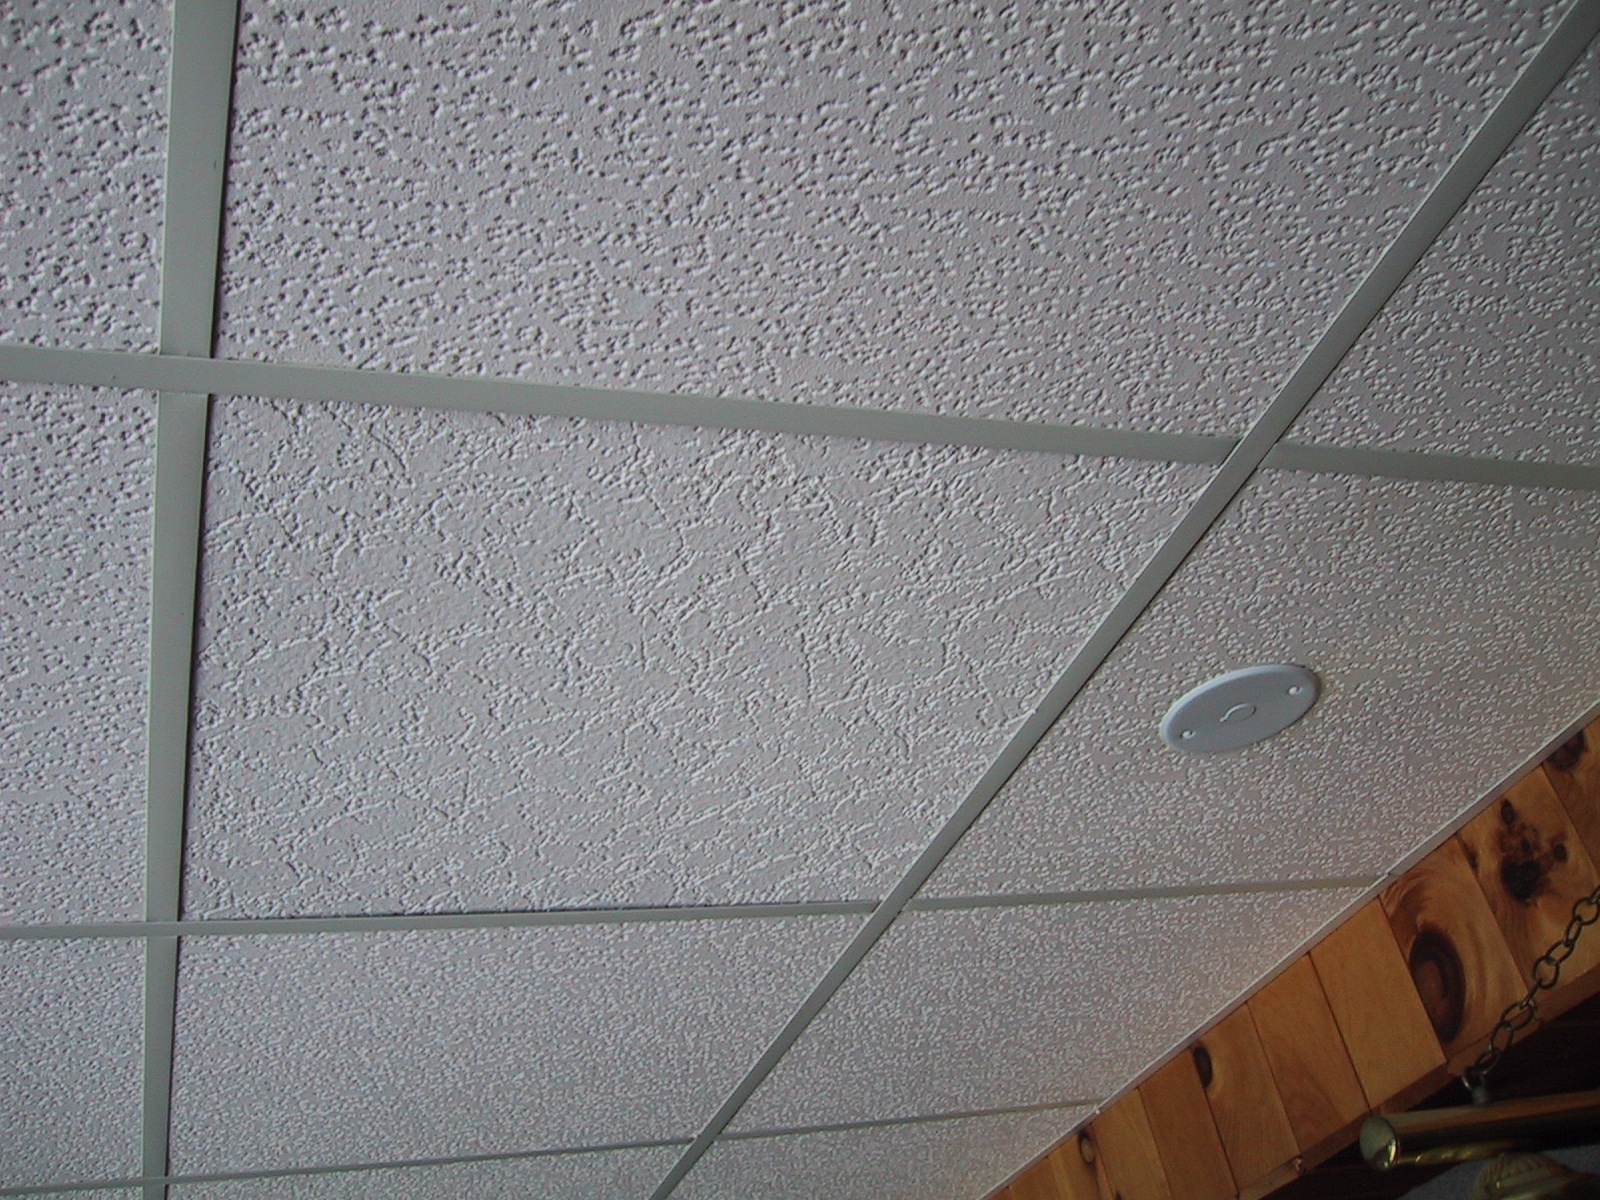 Vinyl Coated Drop Ceiling Tilessome ideas drop ceiling tiles 2x4 the wooden houses